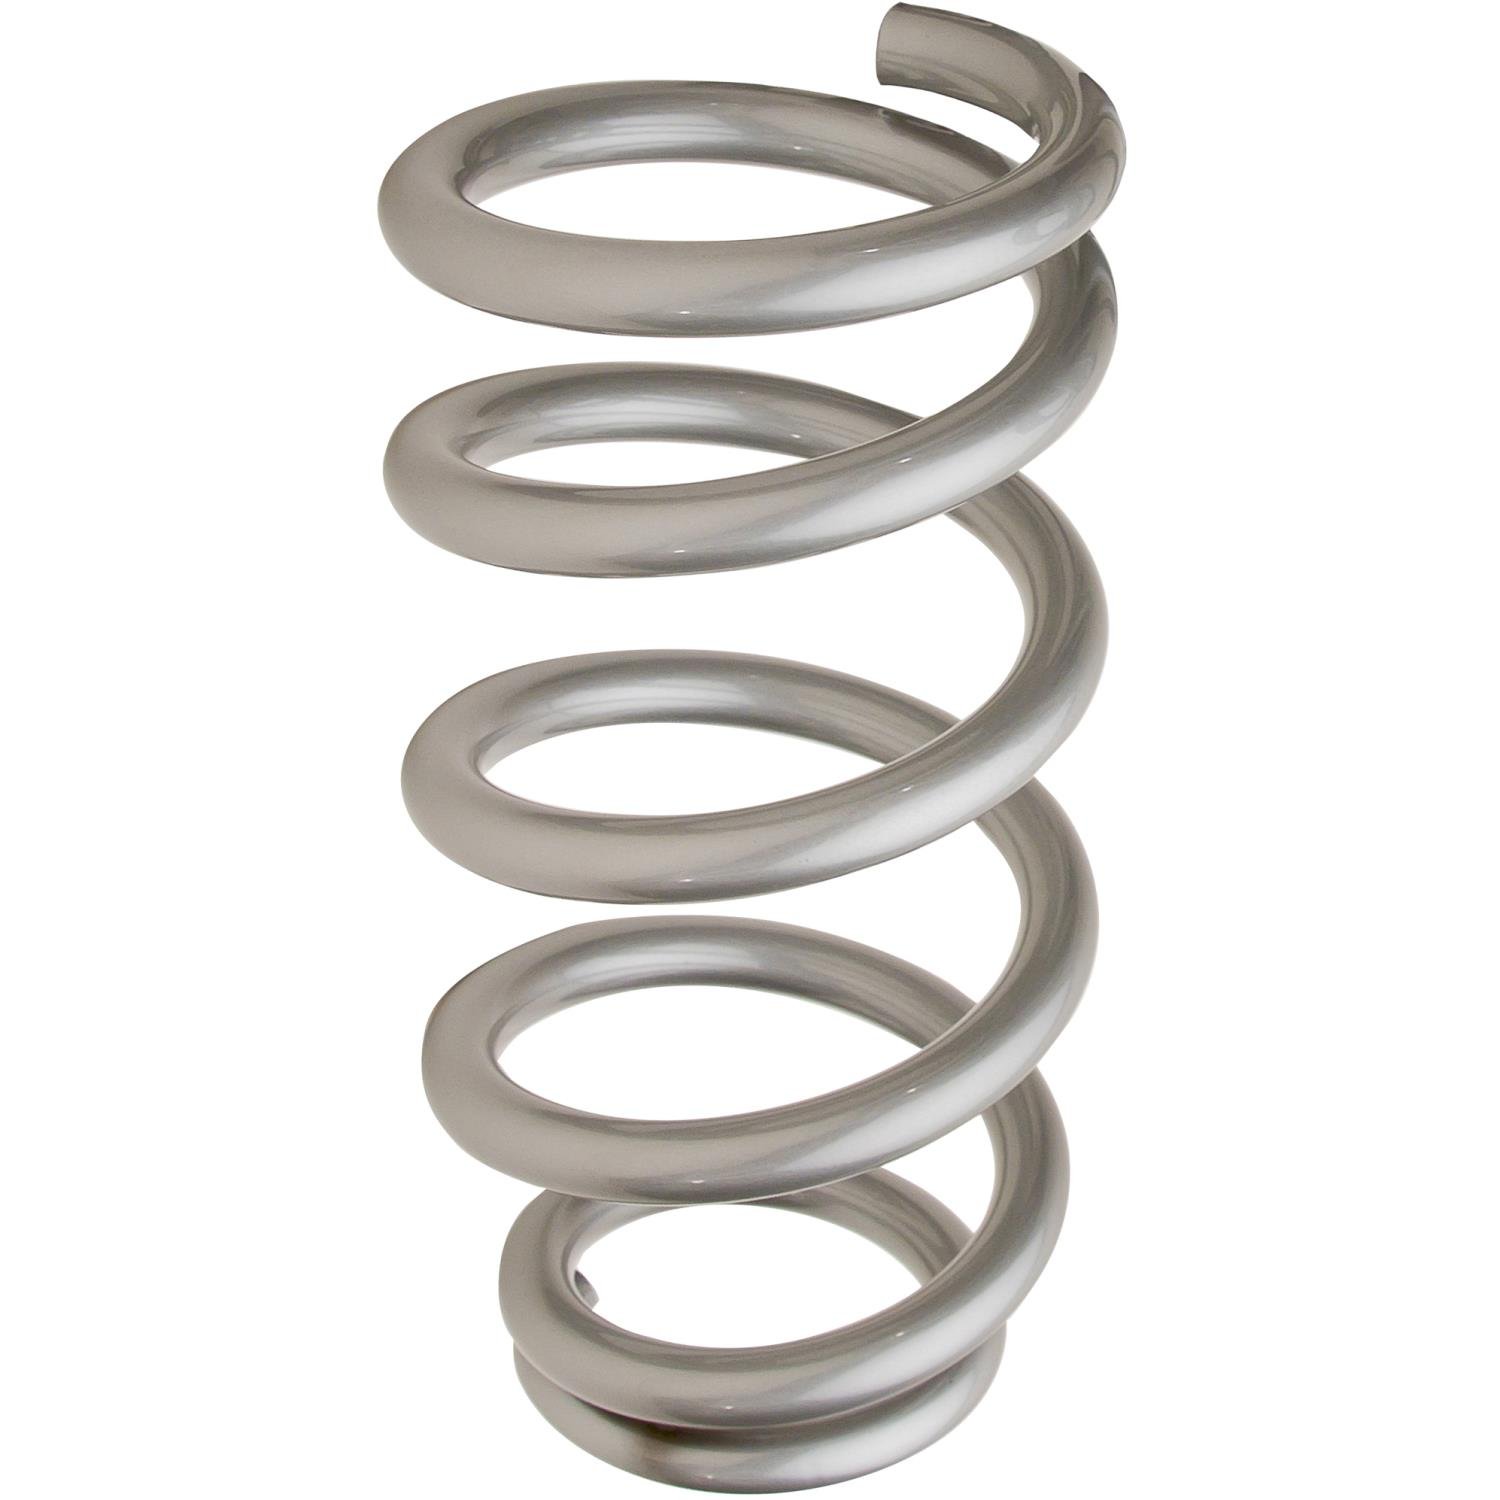 Variable Rate High-Tensile Spring 12